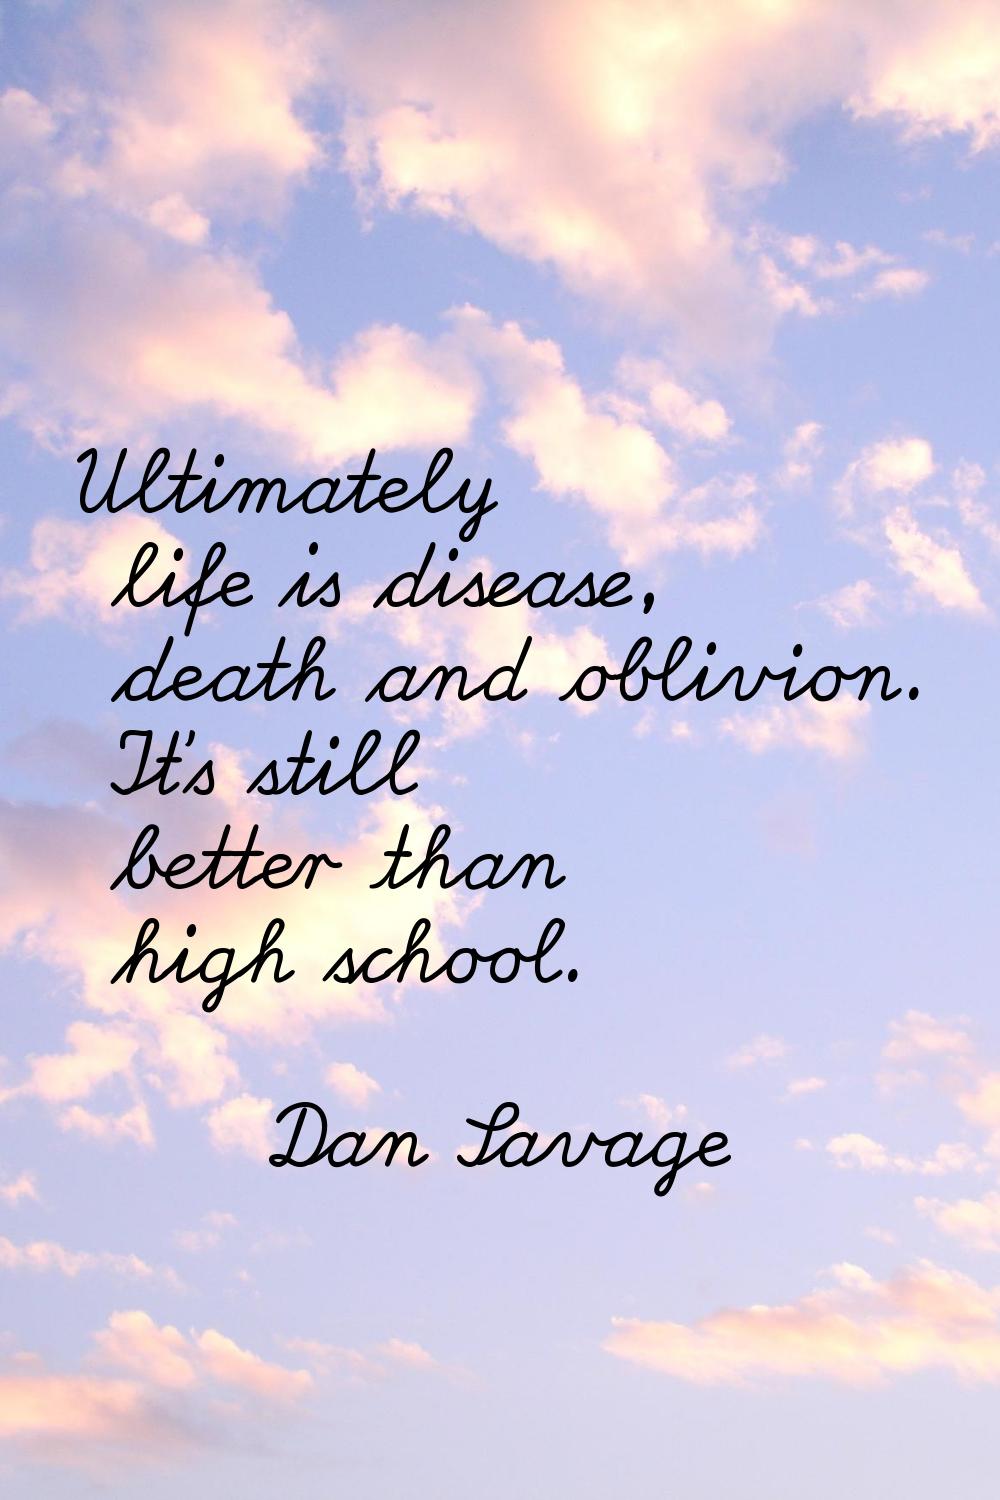 Ultimately life is disease, death and oblivion. It's still better than high school.